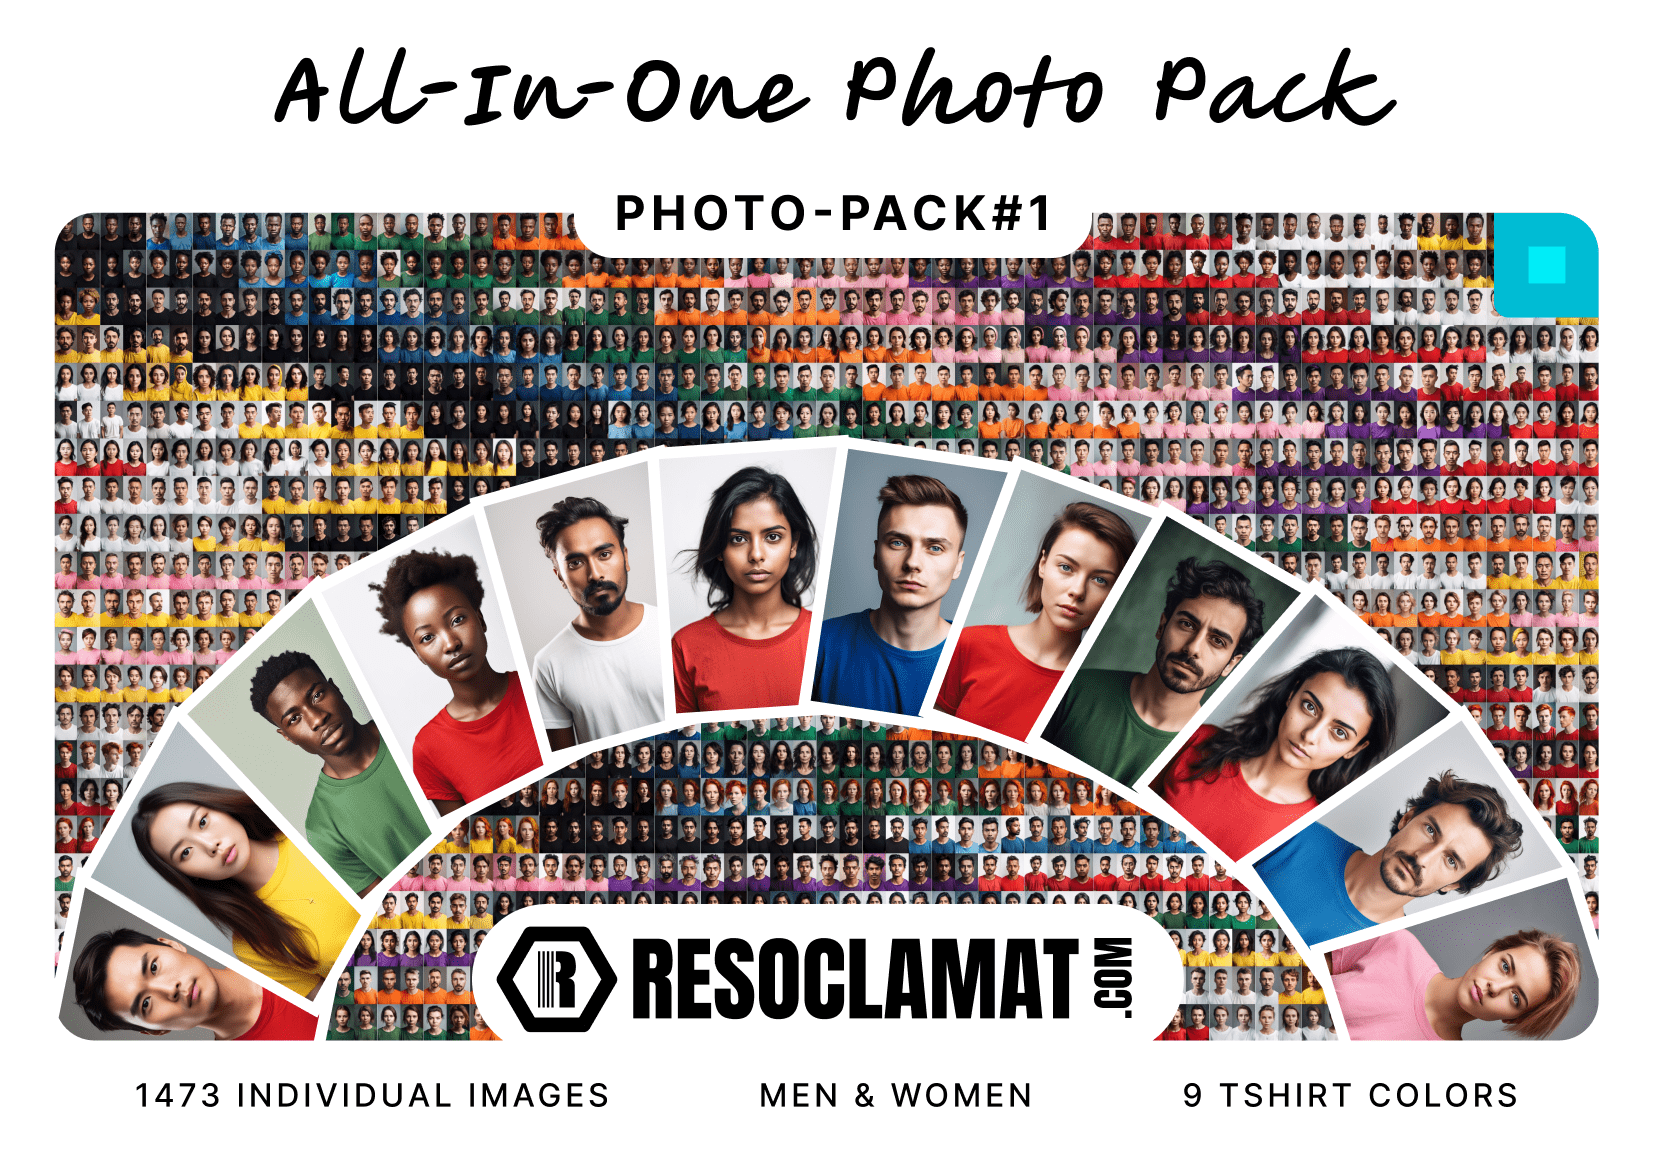 All-In-One Photo Pack 1 (PHOTO-PACK#1)